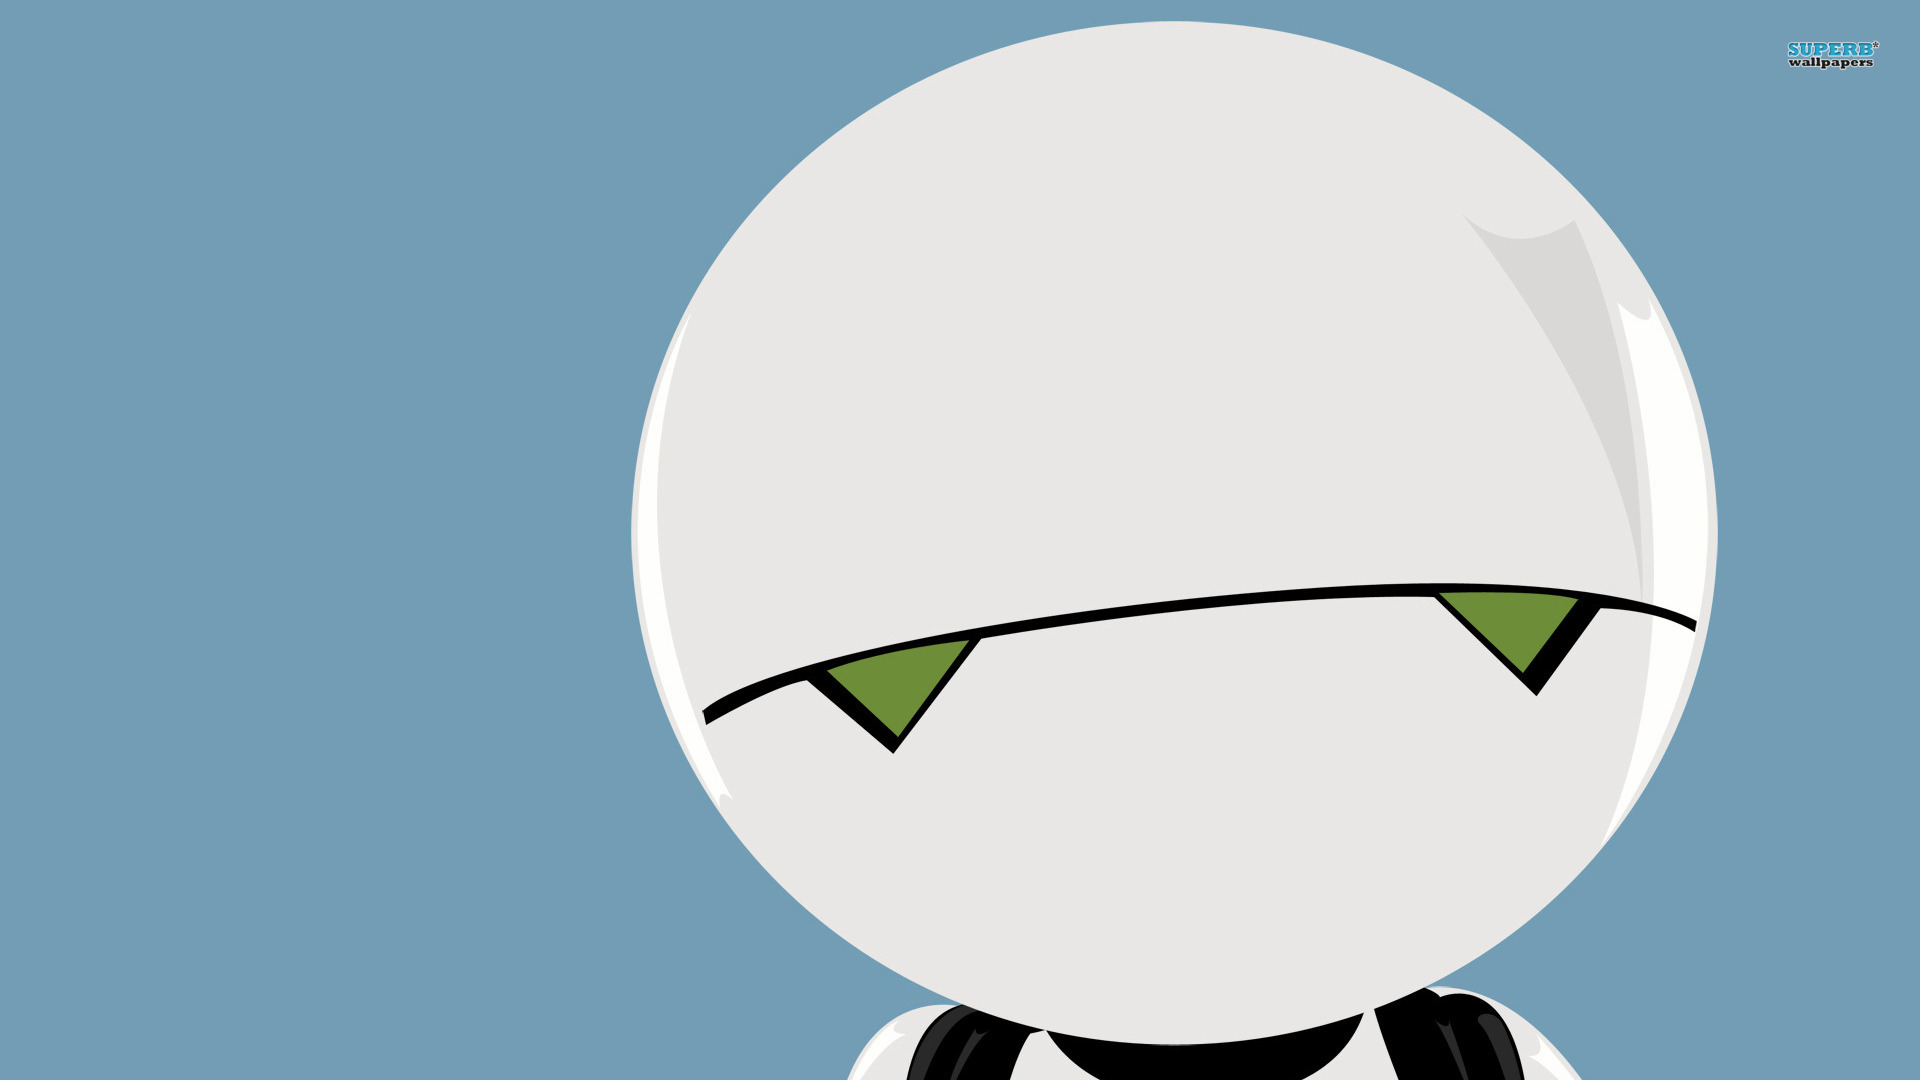 Marvin Wallpaper 42190 1680x1050 px